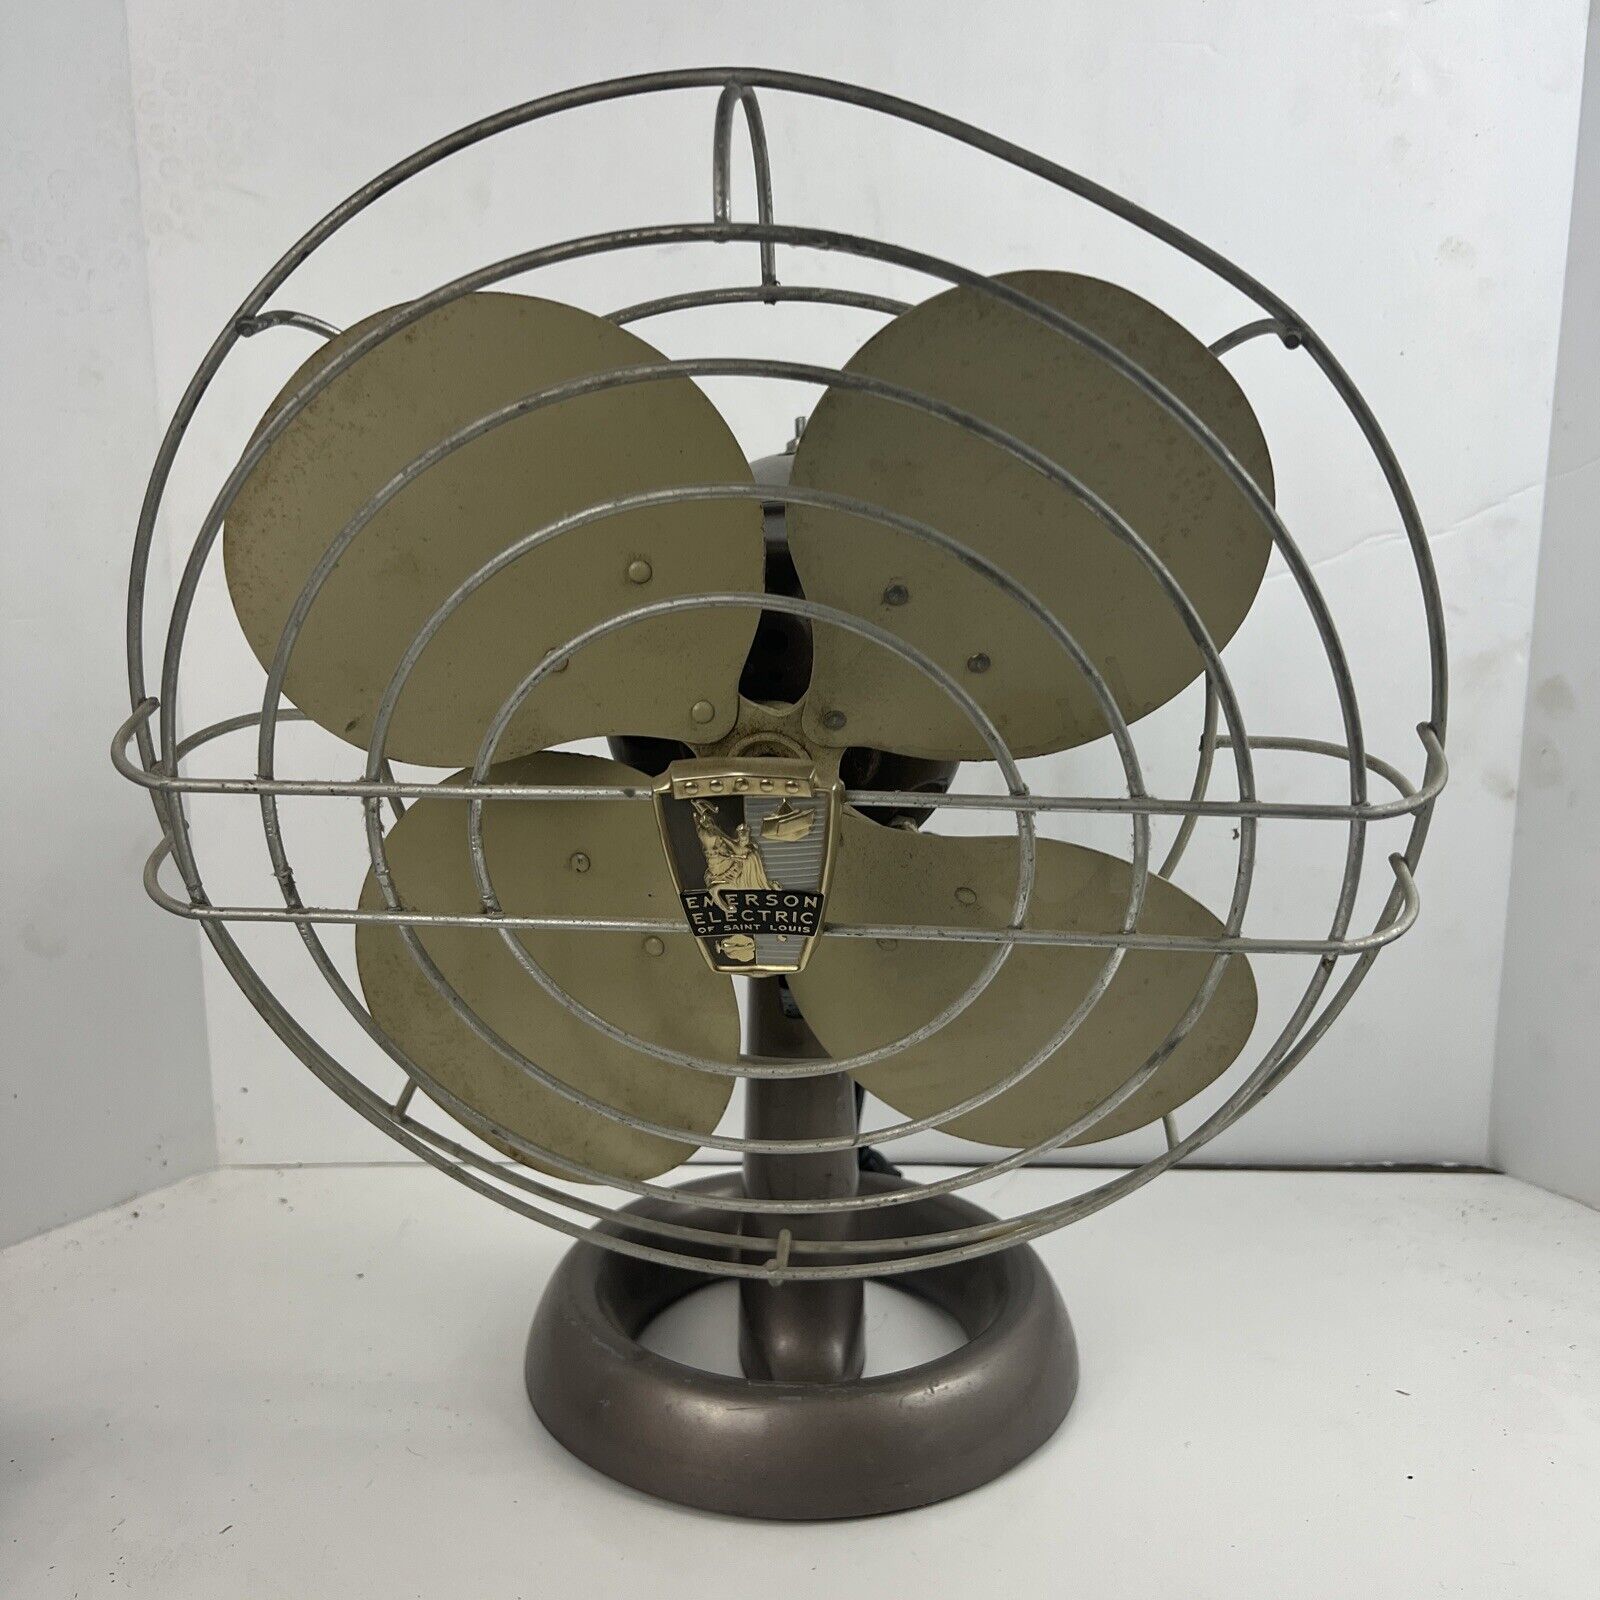 Vintage Emerson Electric Of St. Louis Metal Fan Works But Needs Some Work